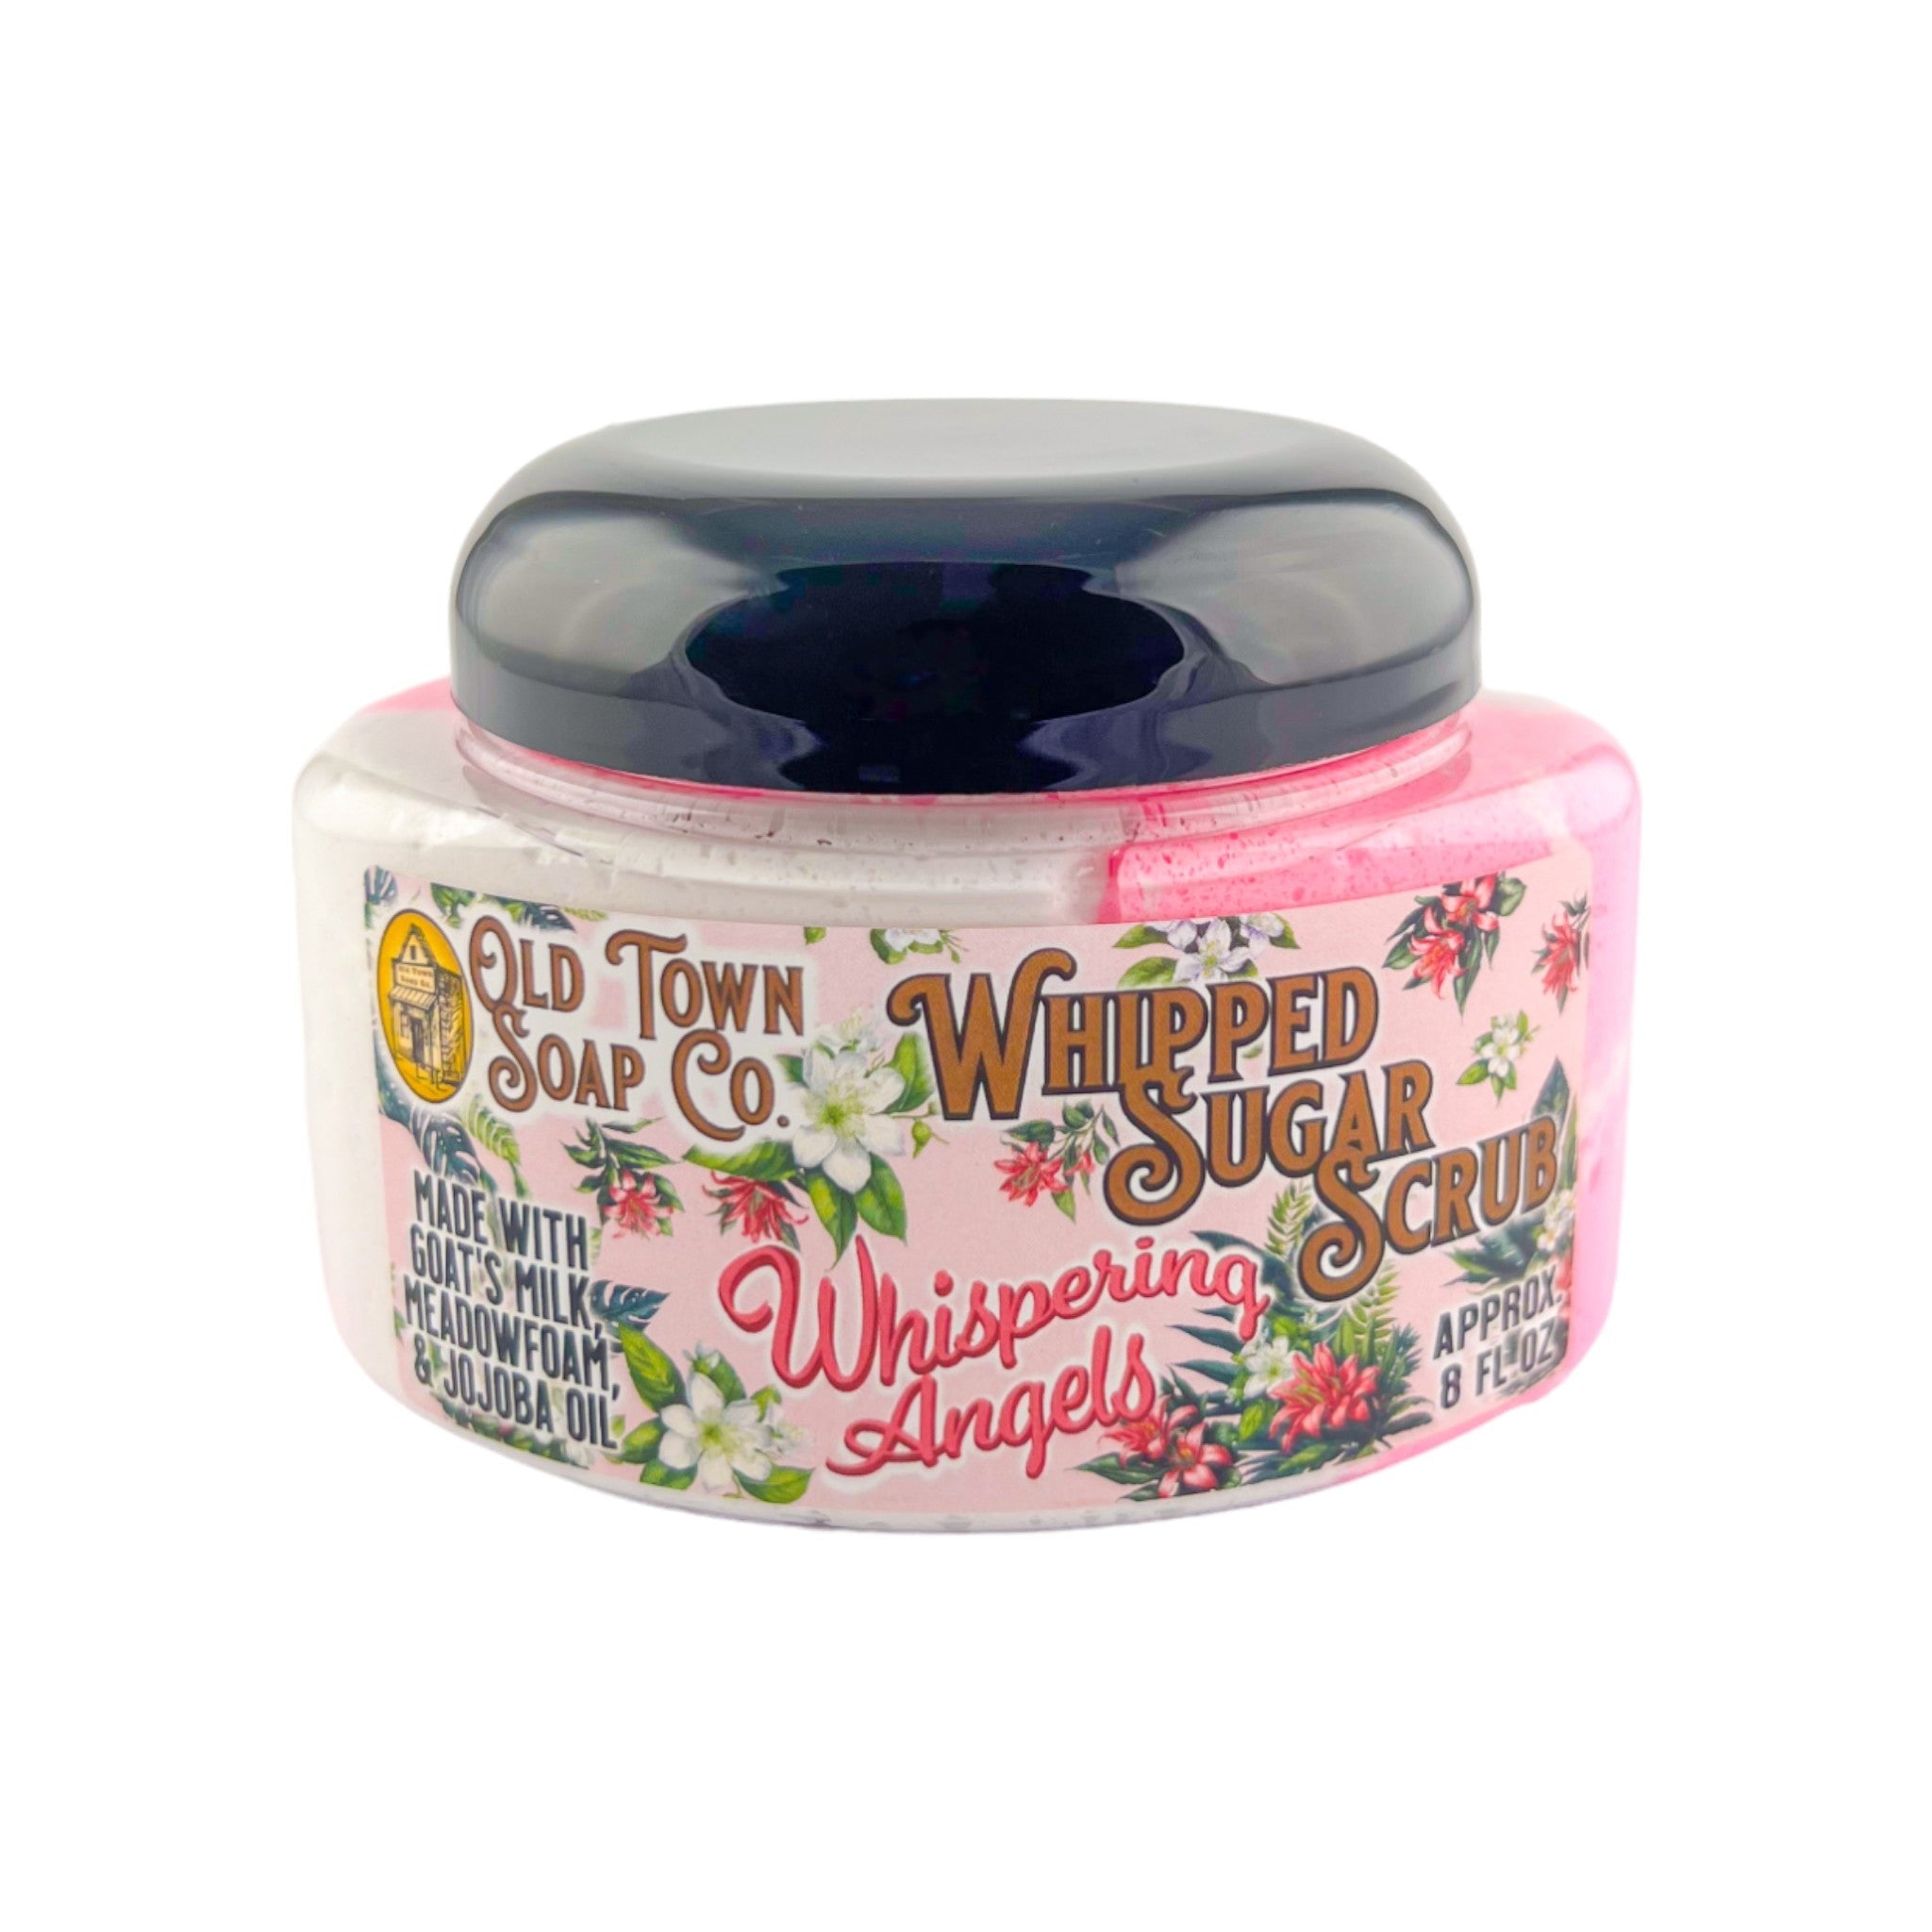 Whispering Angels -Whipped Sugar Scrub Soap - Old Town Soap Co.